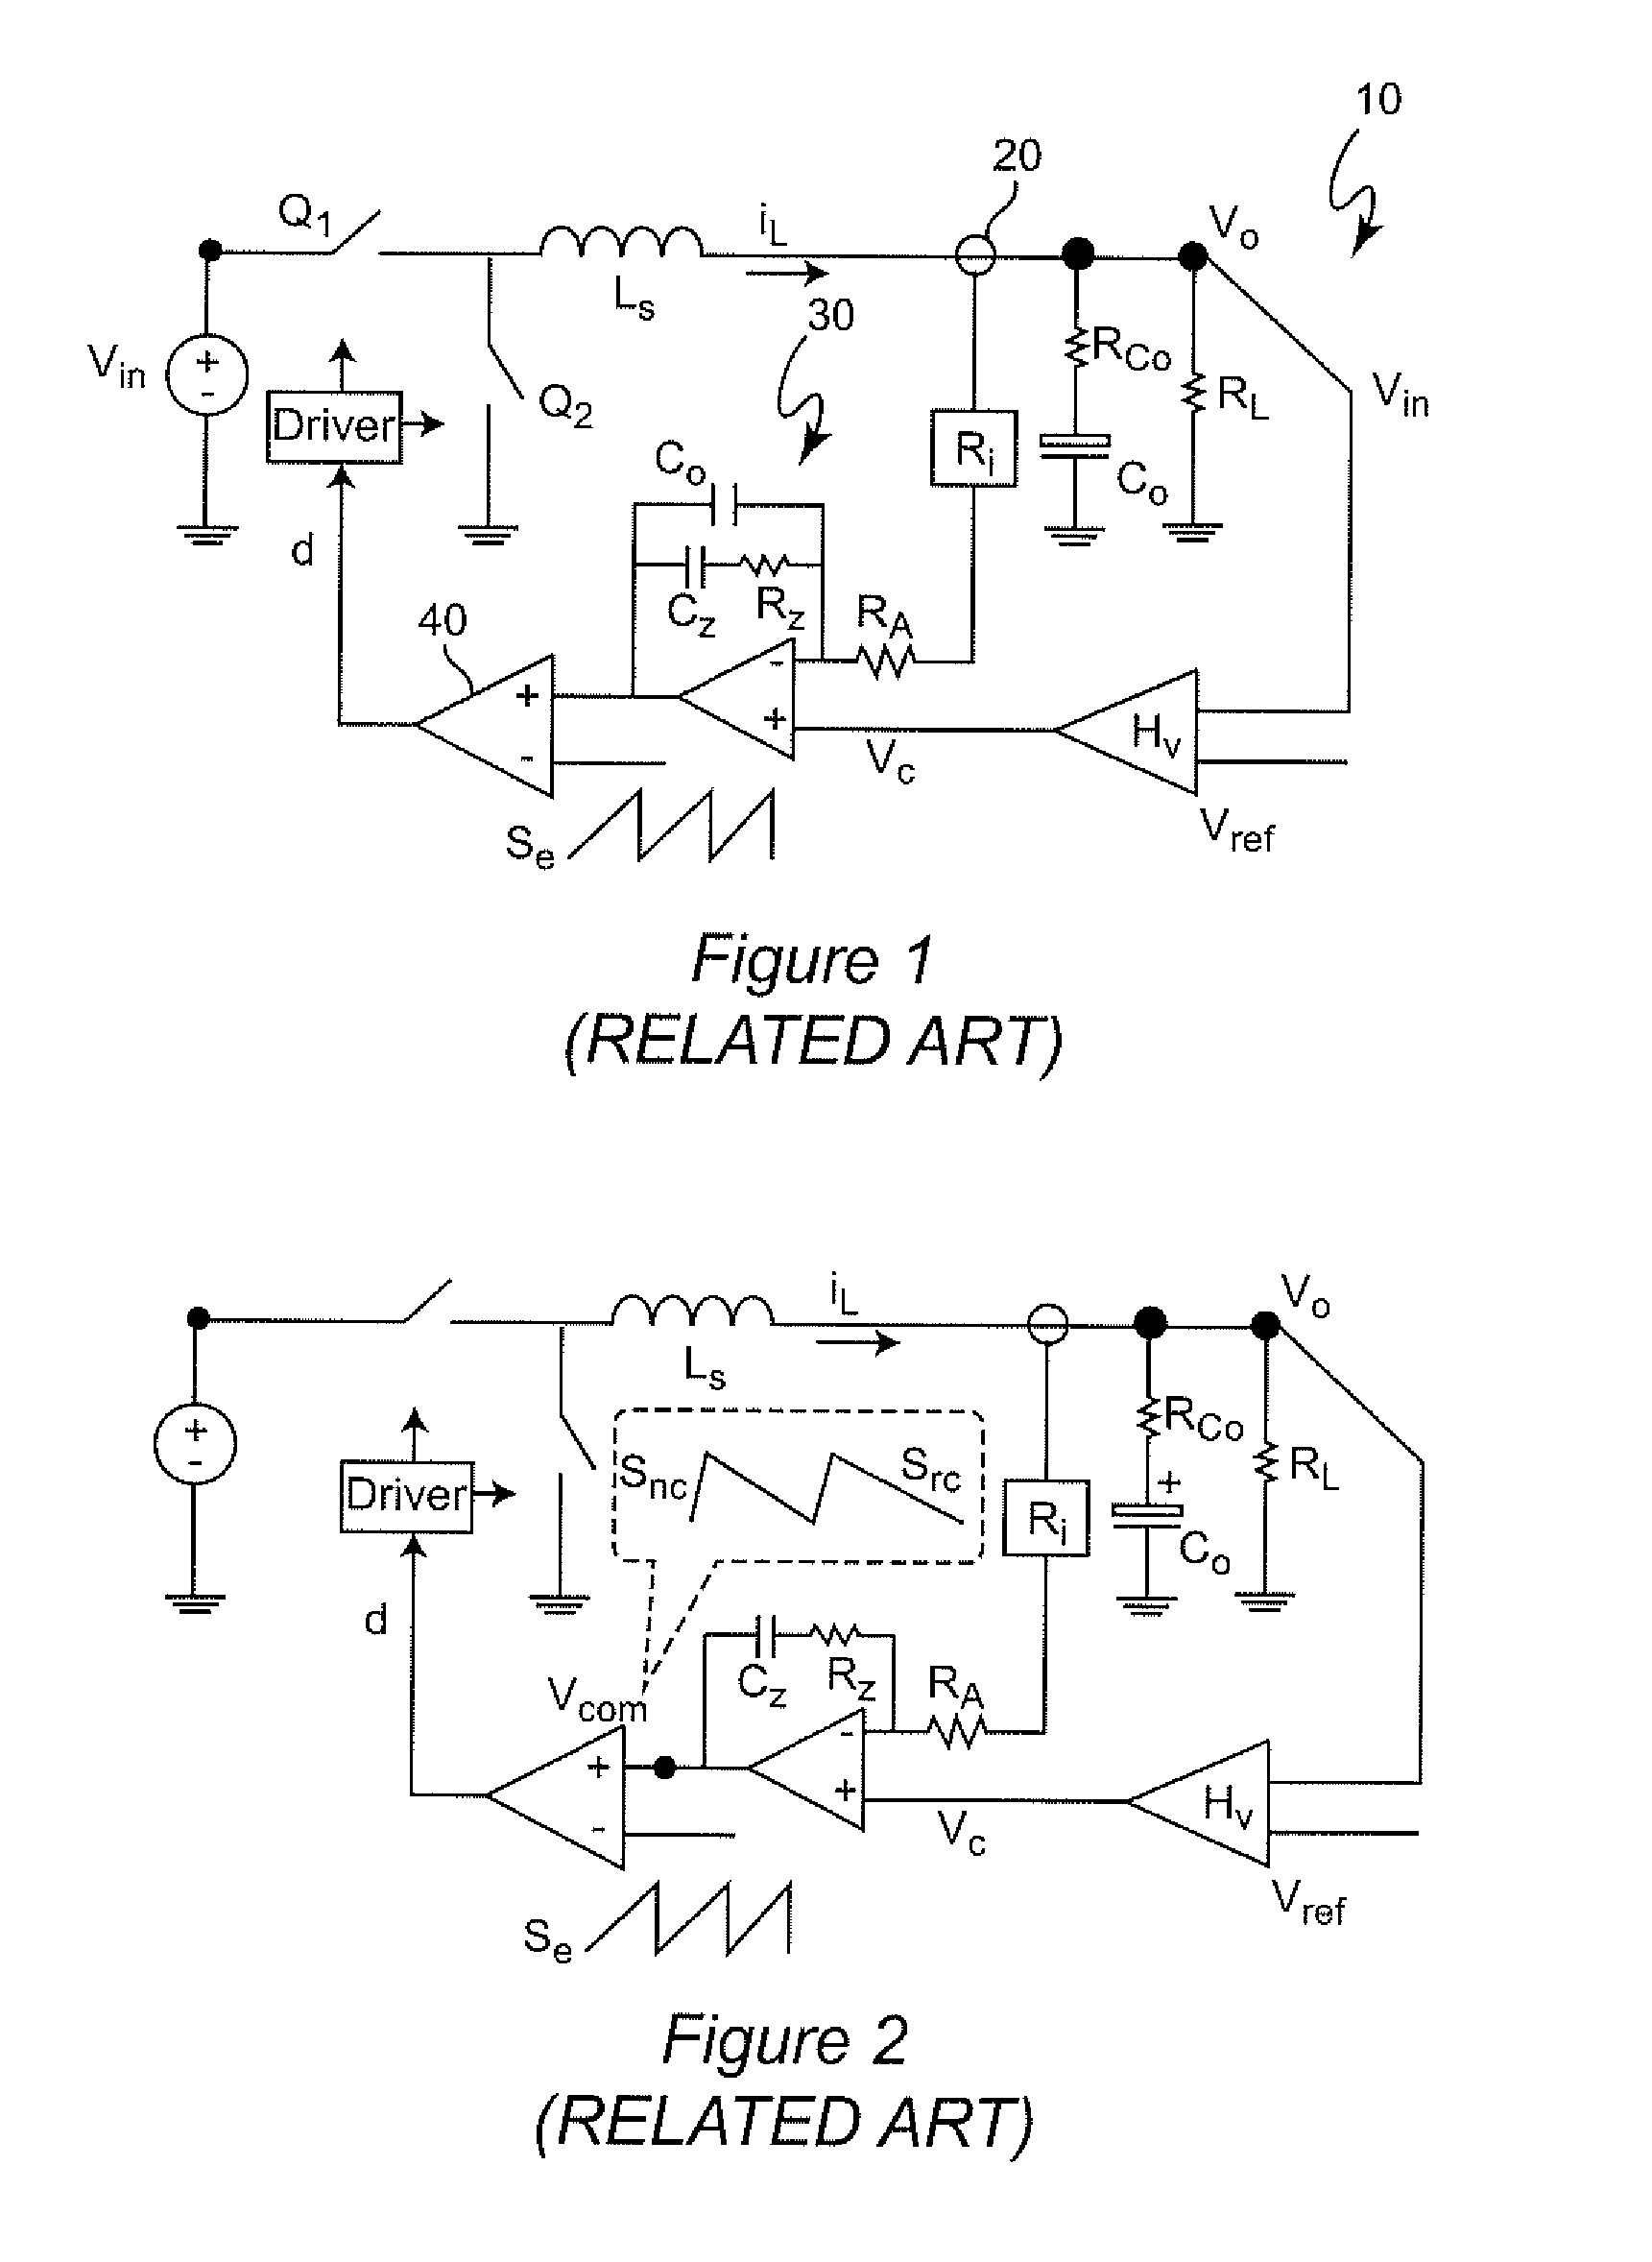 I+hu 2 +l Average Current Mode (ACM) Control for Switching Power Converters